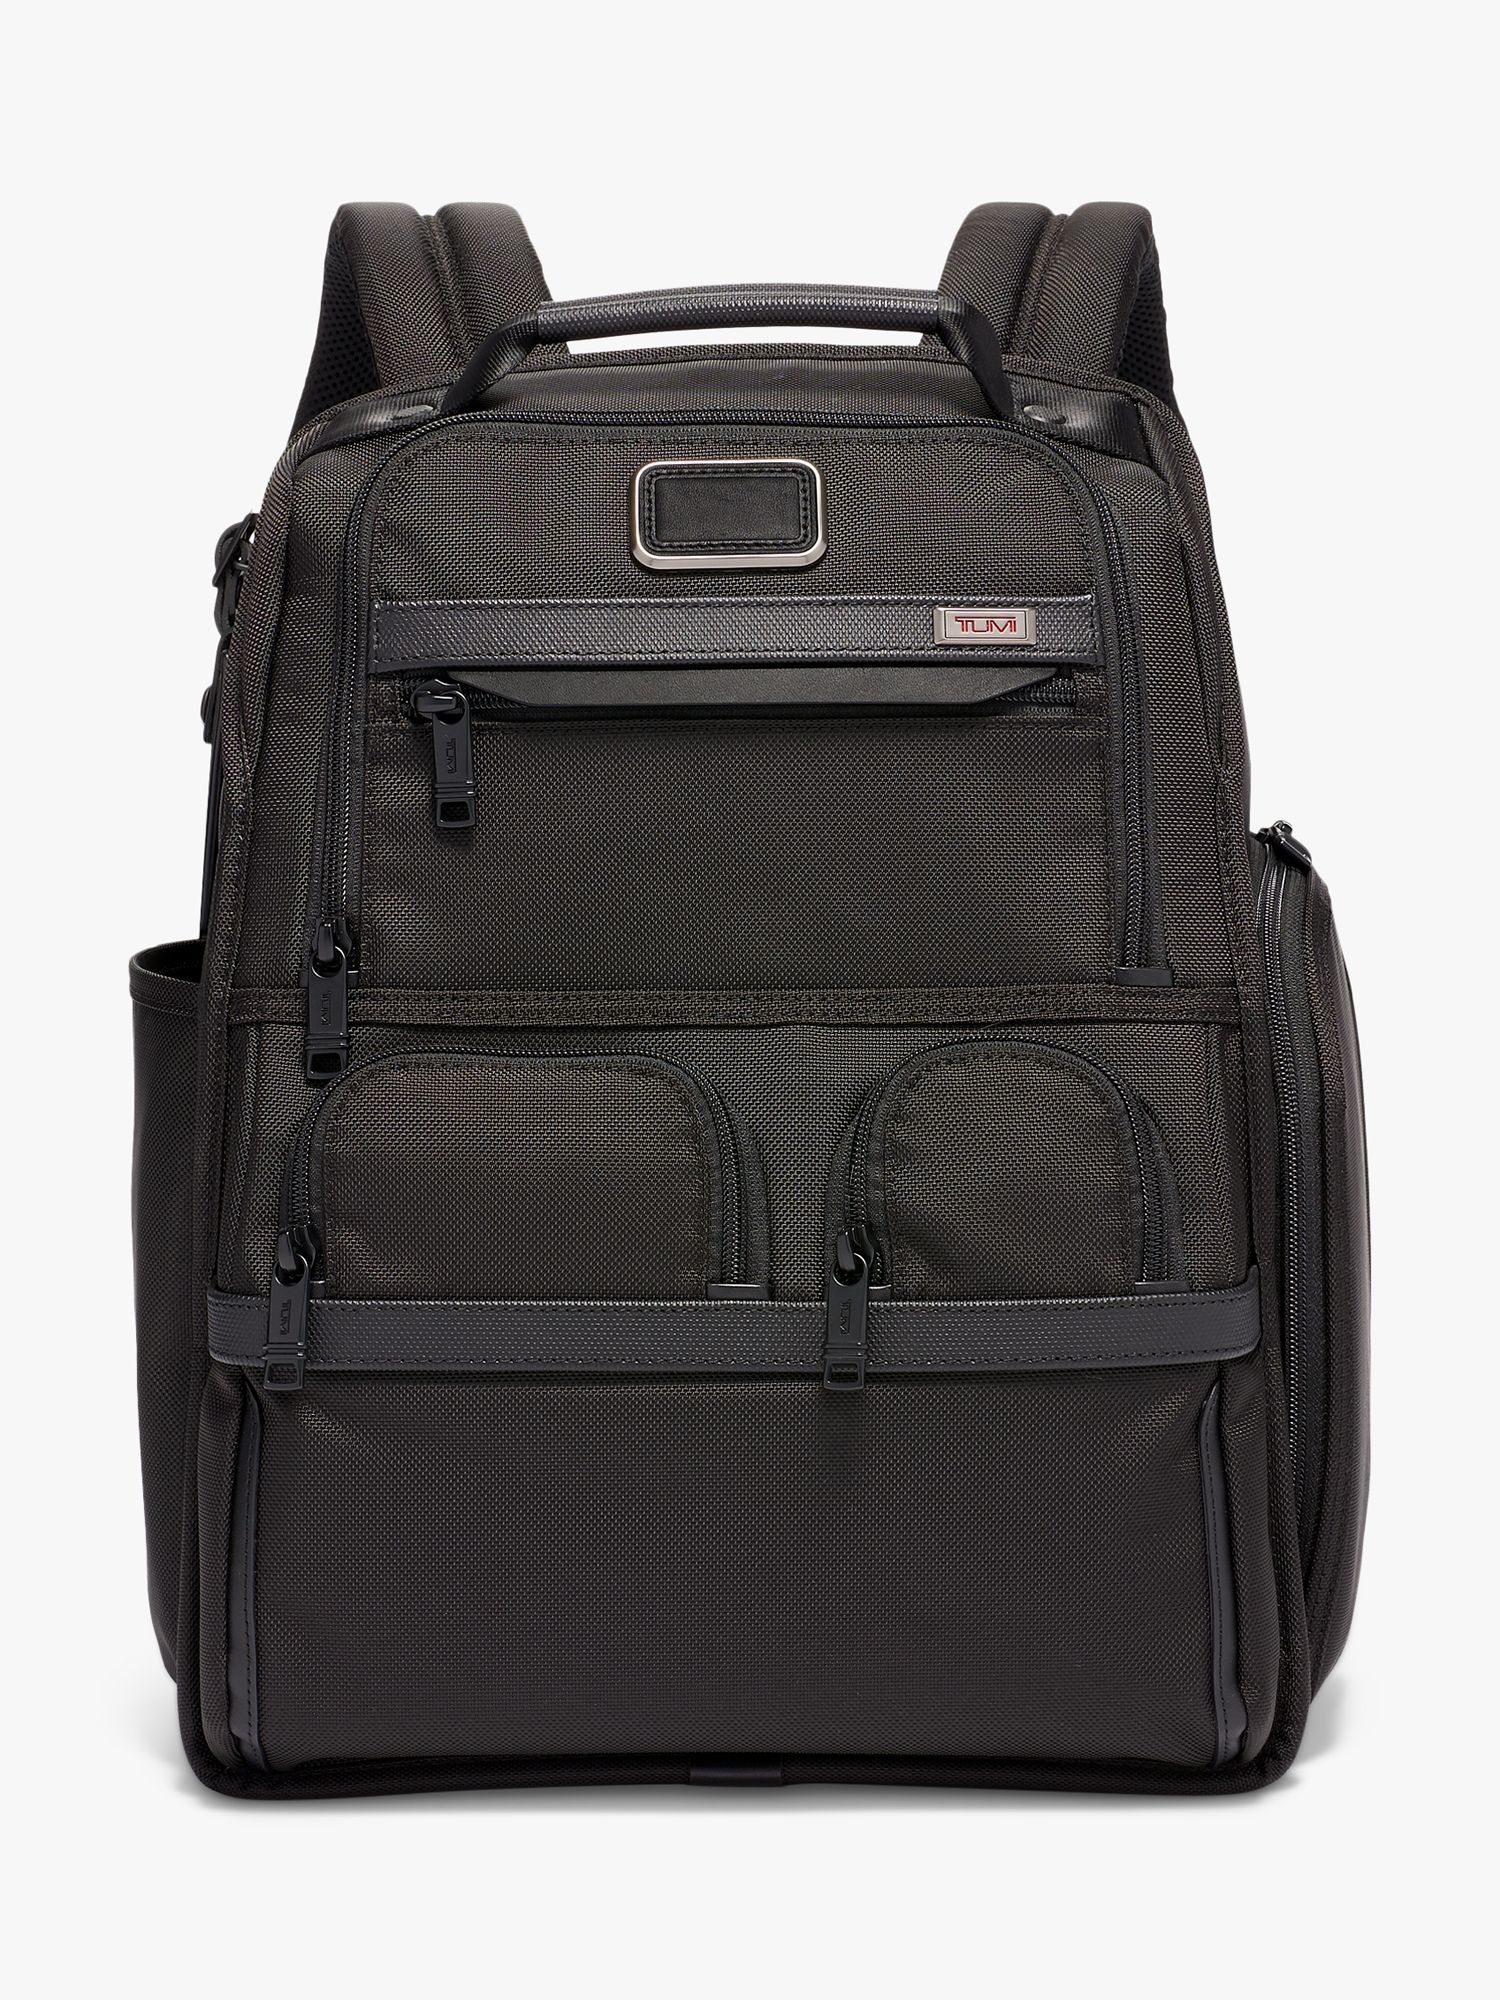 TUMI Alpha 3 Compact Laptop Brief Pack Backpack, Black at John Lewis ...